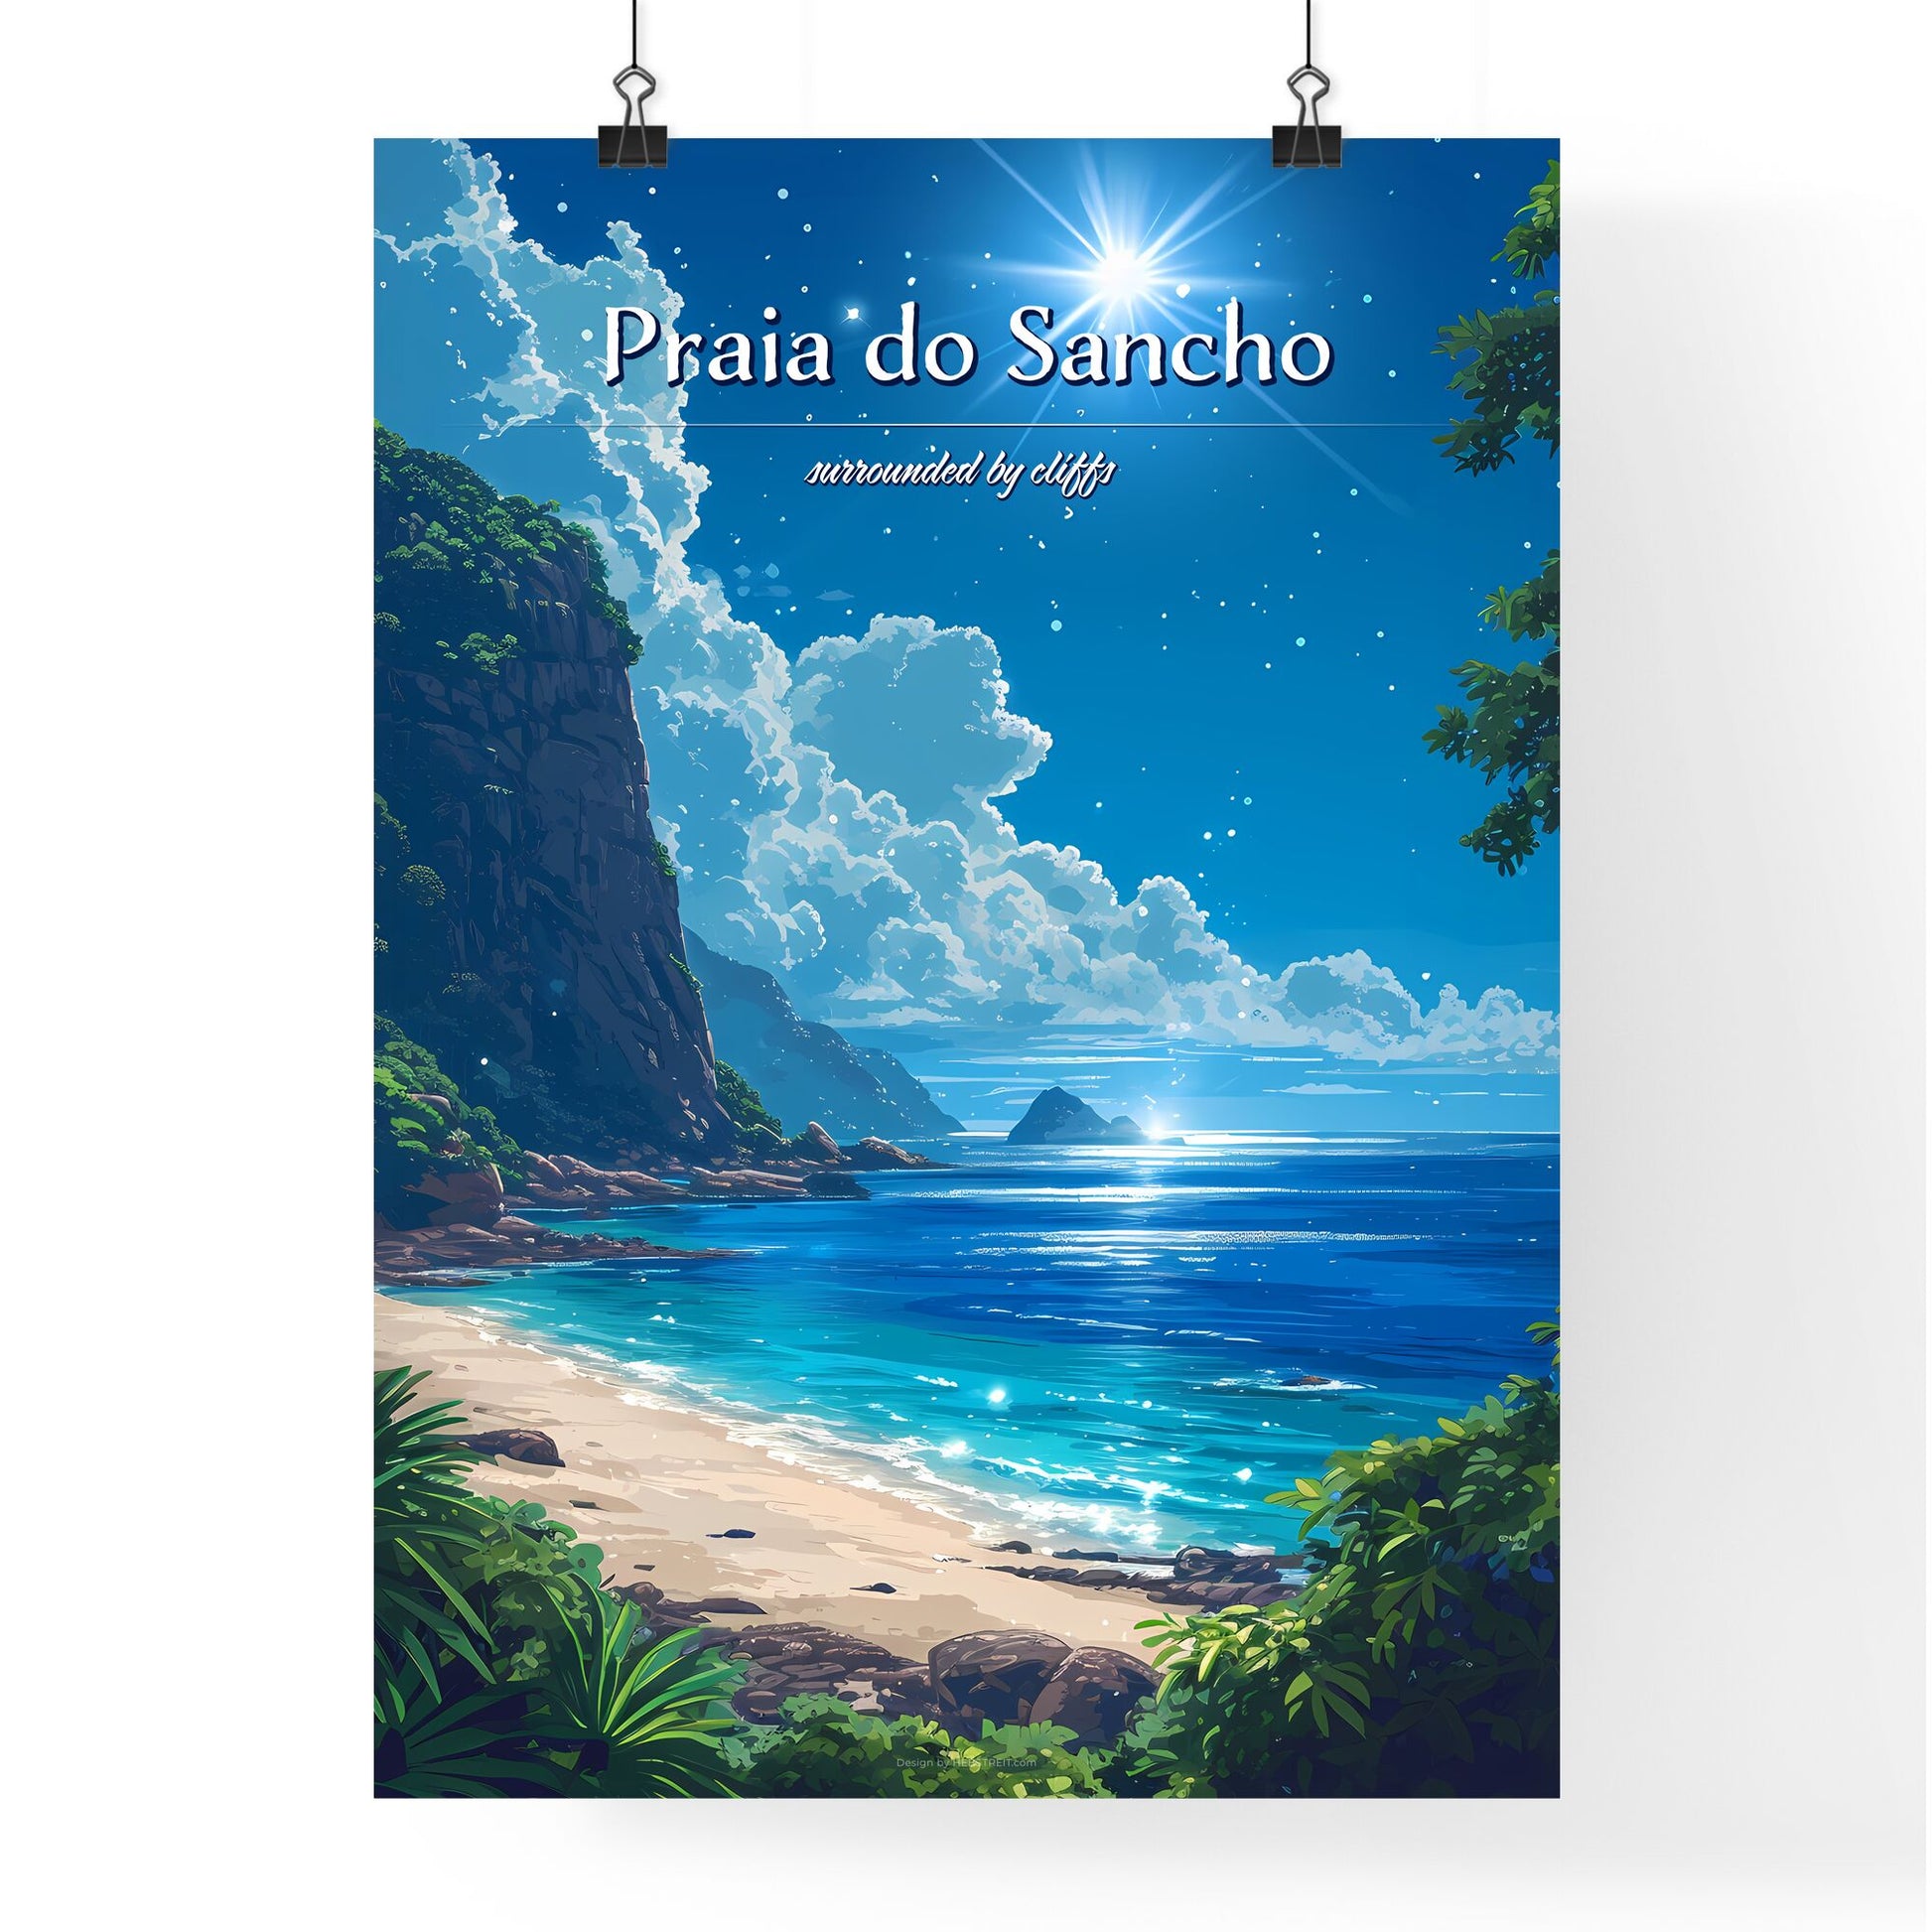 Praia do Sancho Beach - Art print of a couple of cats wearing hoodies and sunglasses Default Title